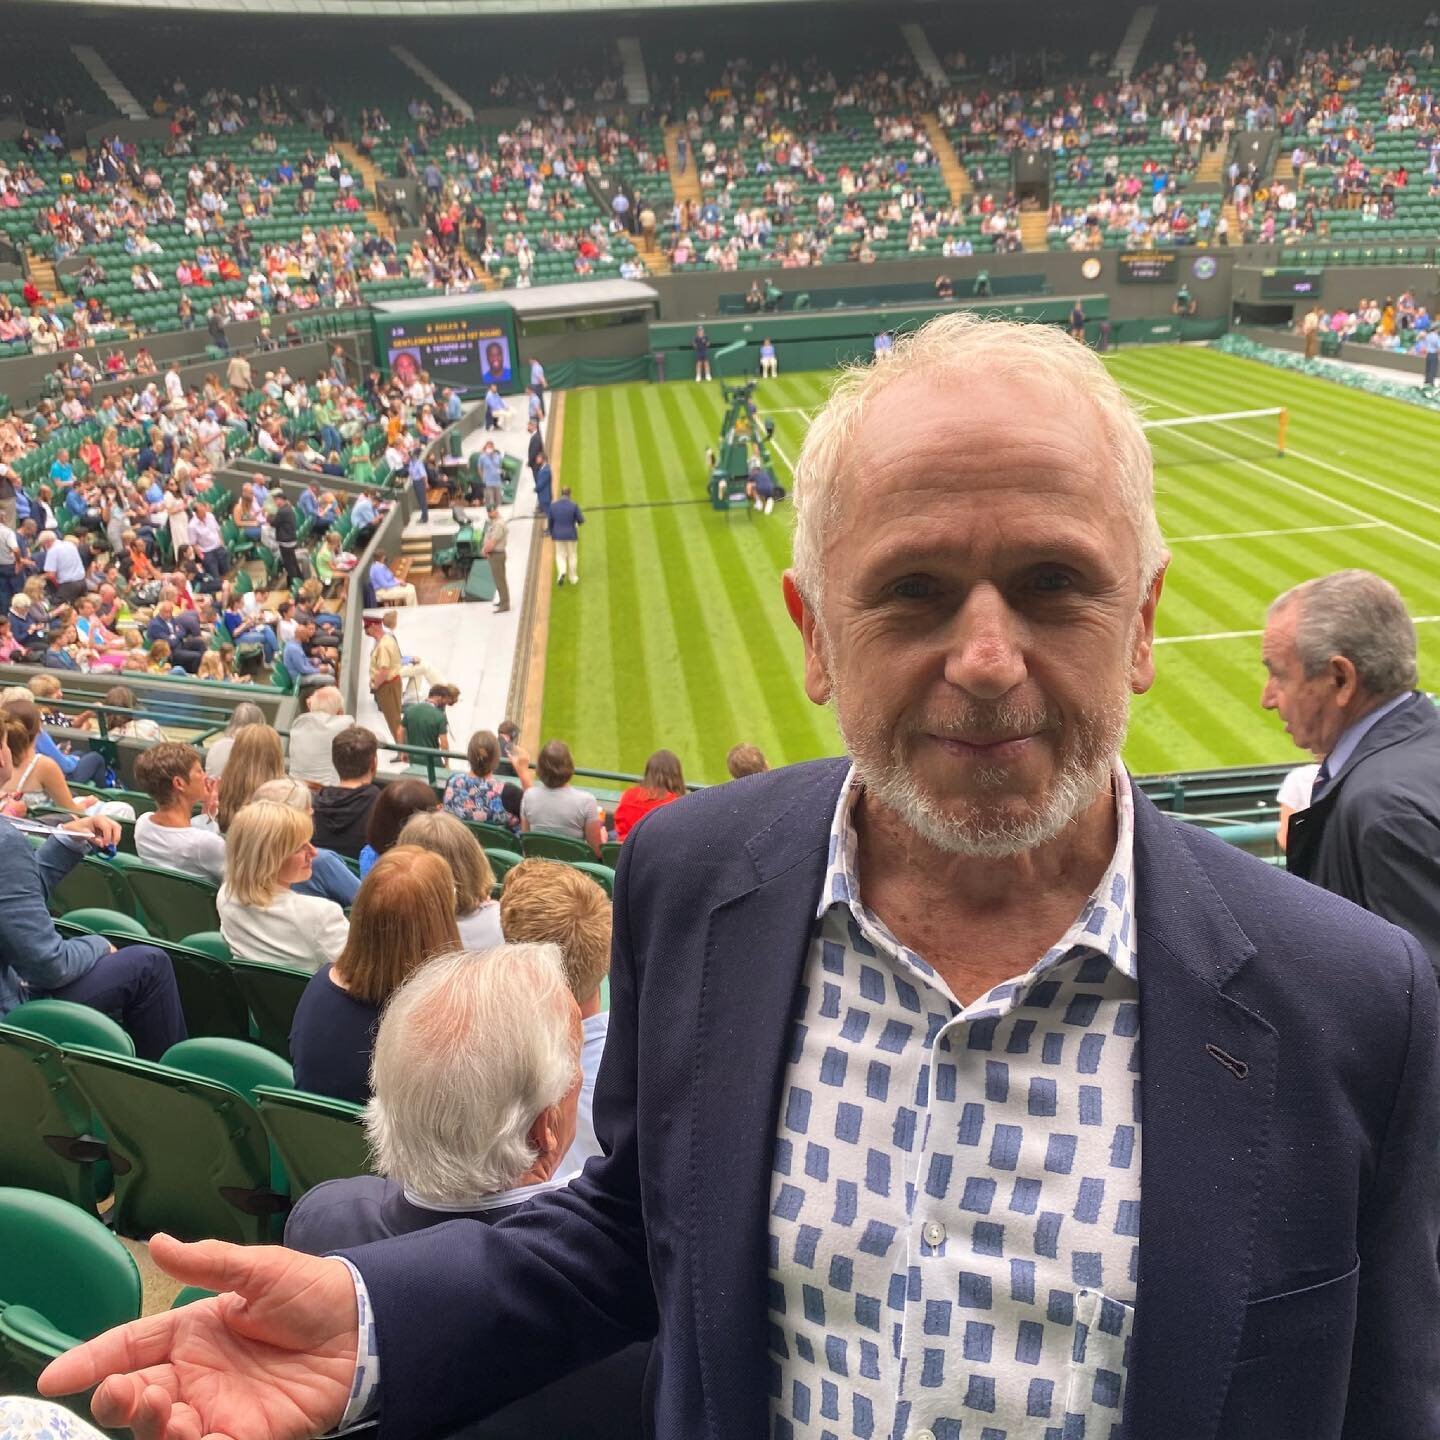 My friend Margaret and I had a wonderful time at the opening day of Wimbledon, on No. 1 Court. Digital ticketing was a nightmare, but worth it in the end!! WS x